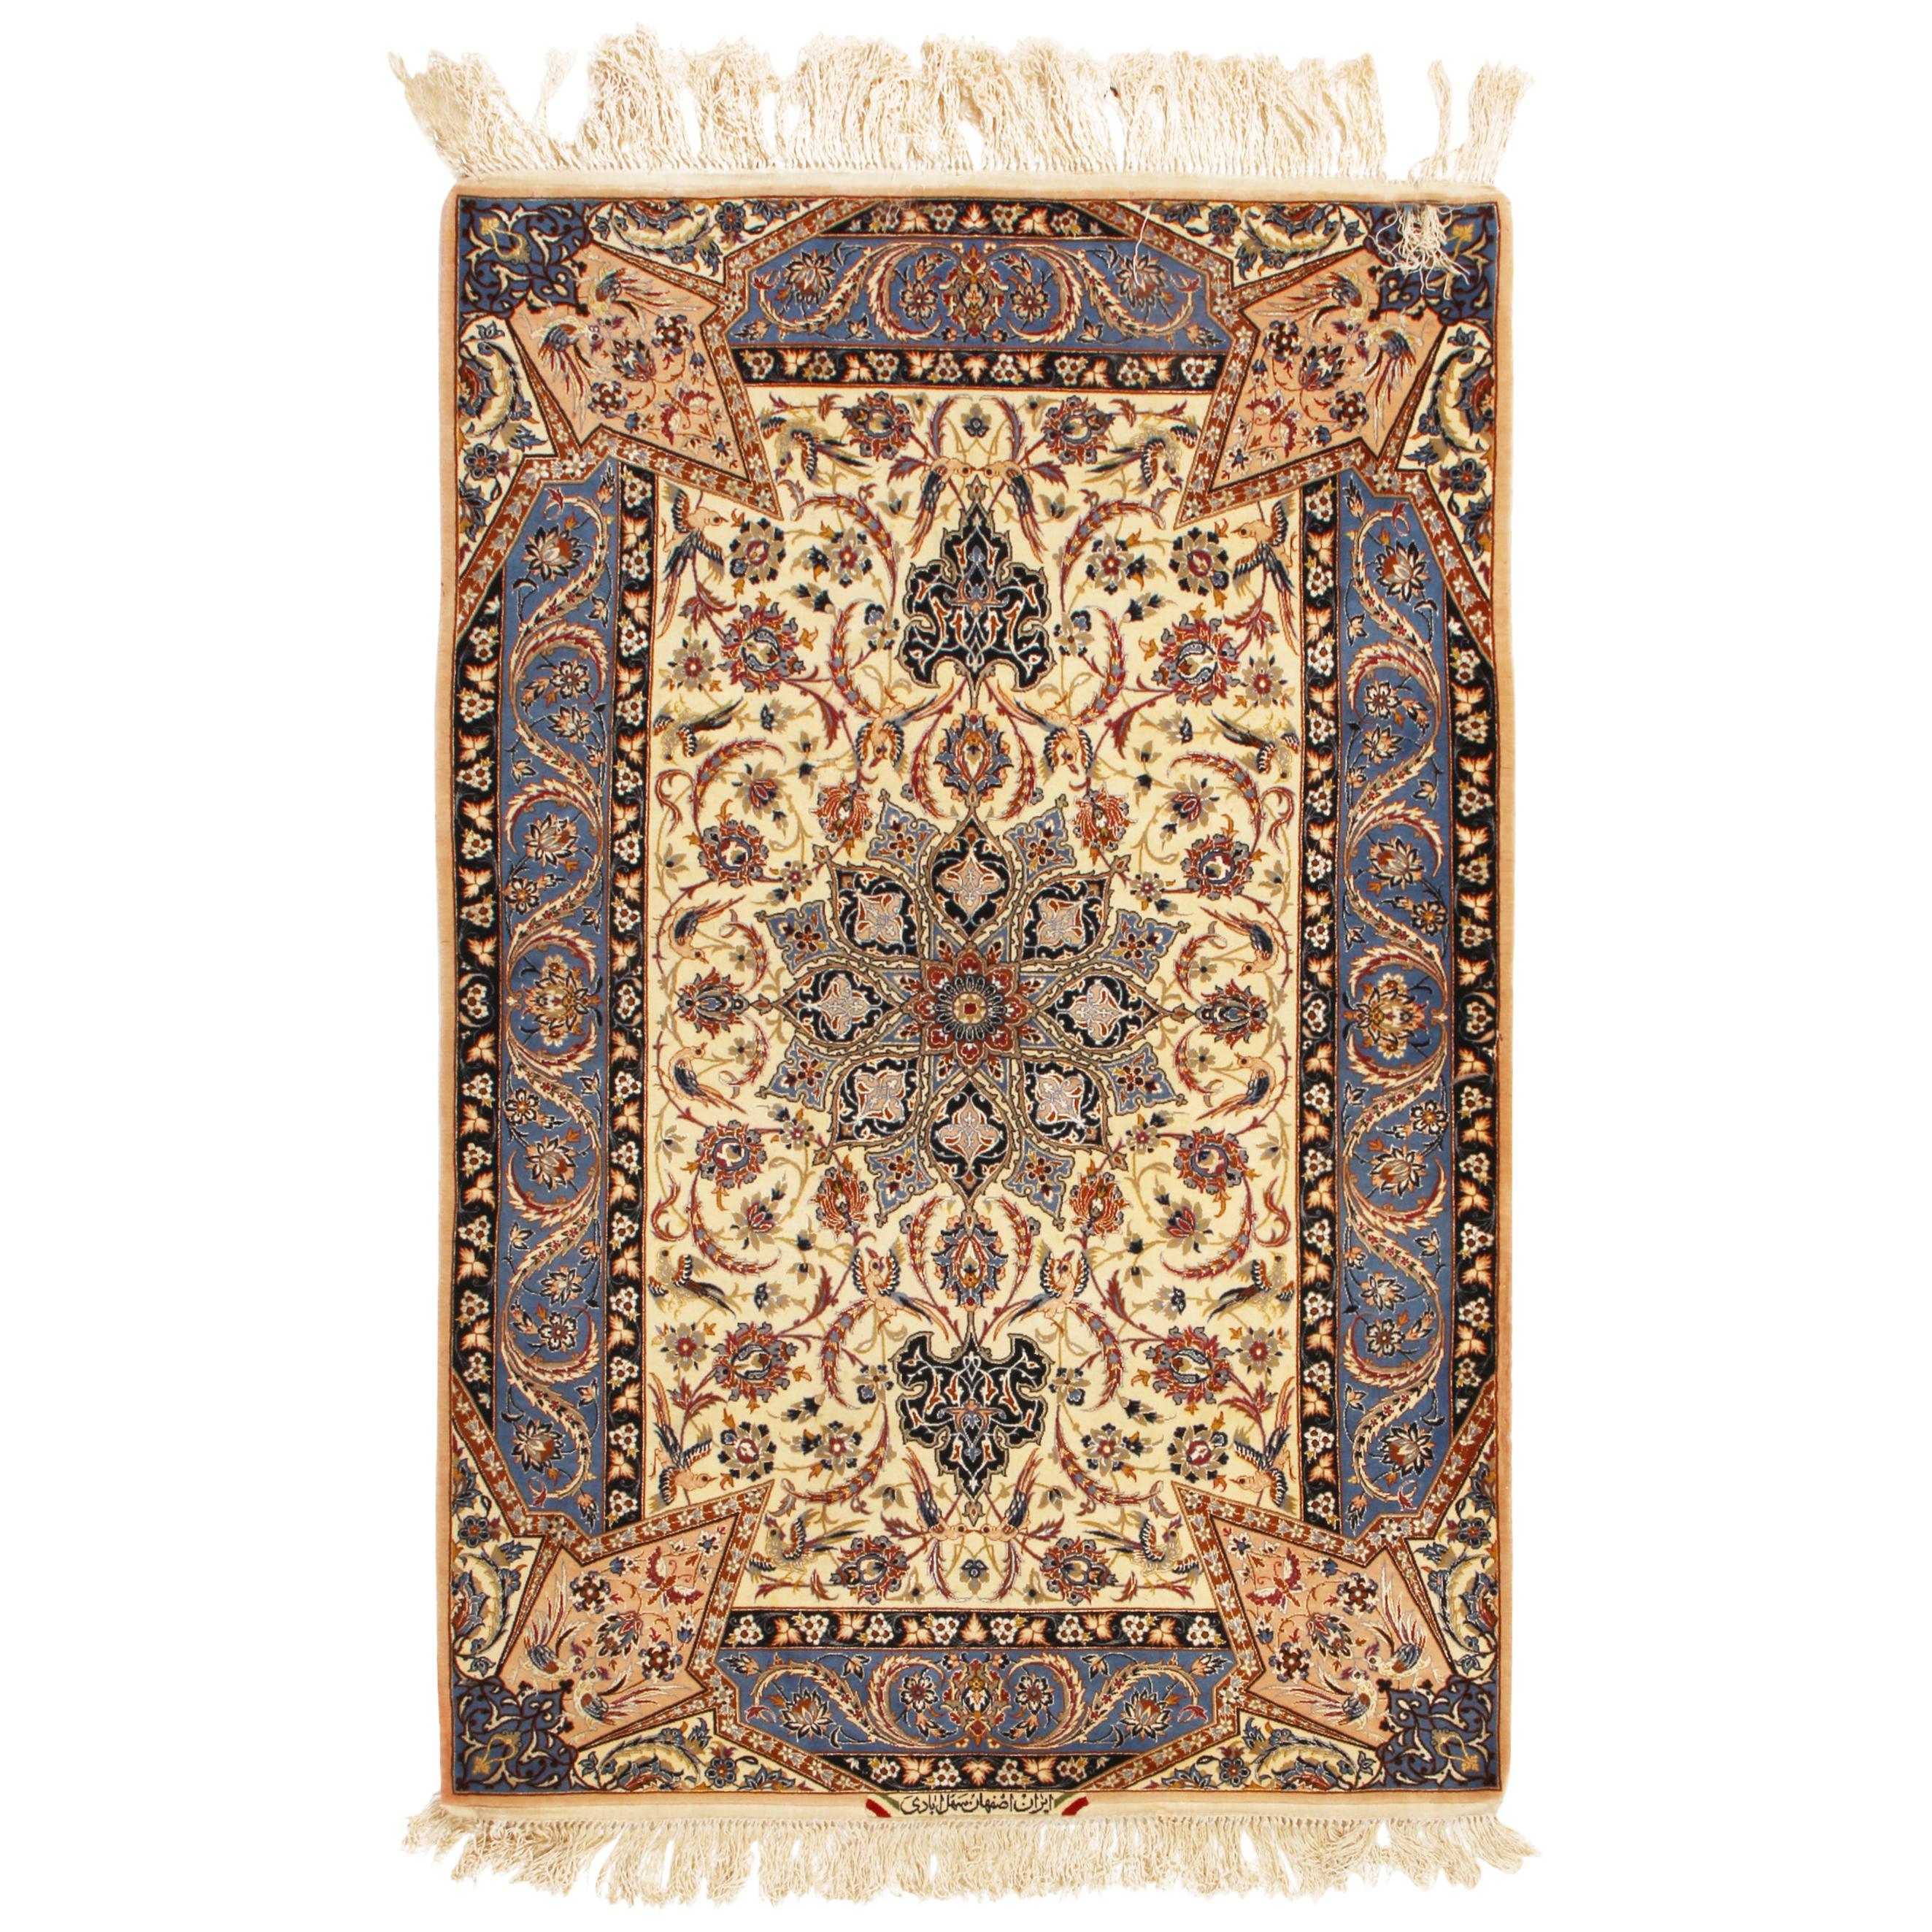 17th Century Inspired Vintage Isfahan Beige and Blue Wool and Silk Persian Rug